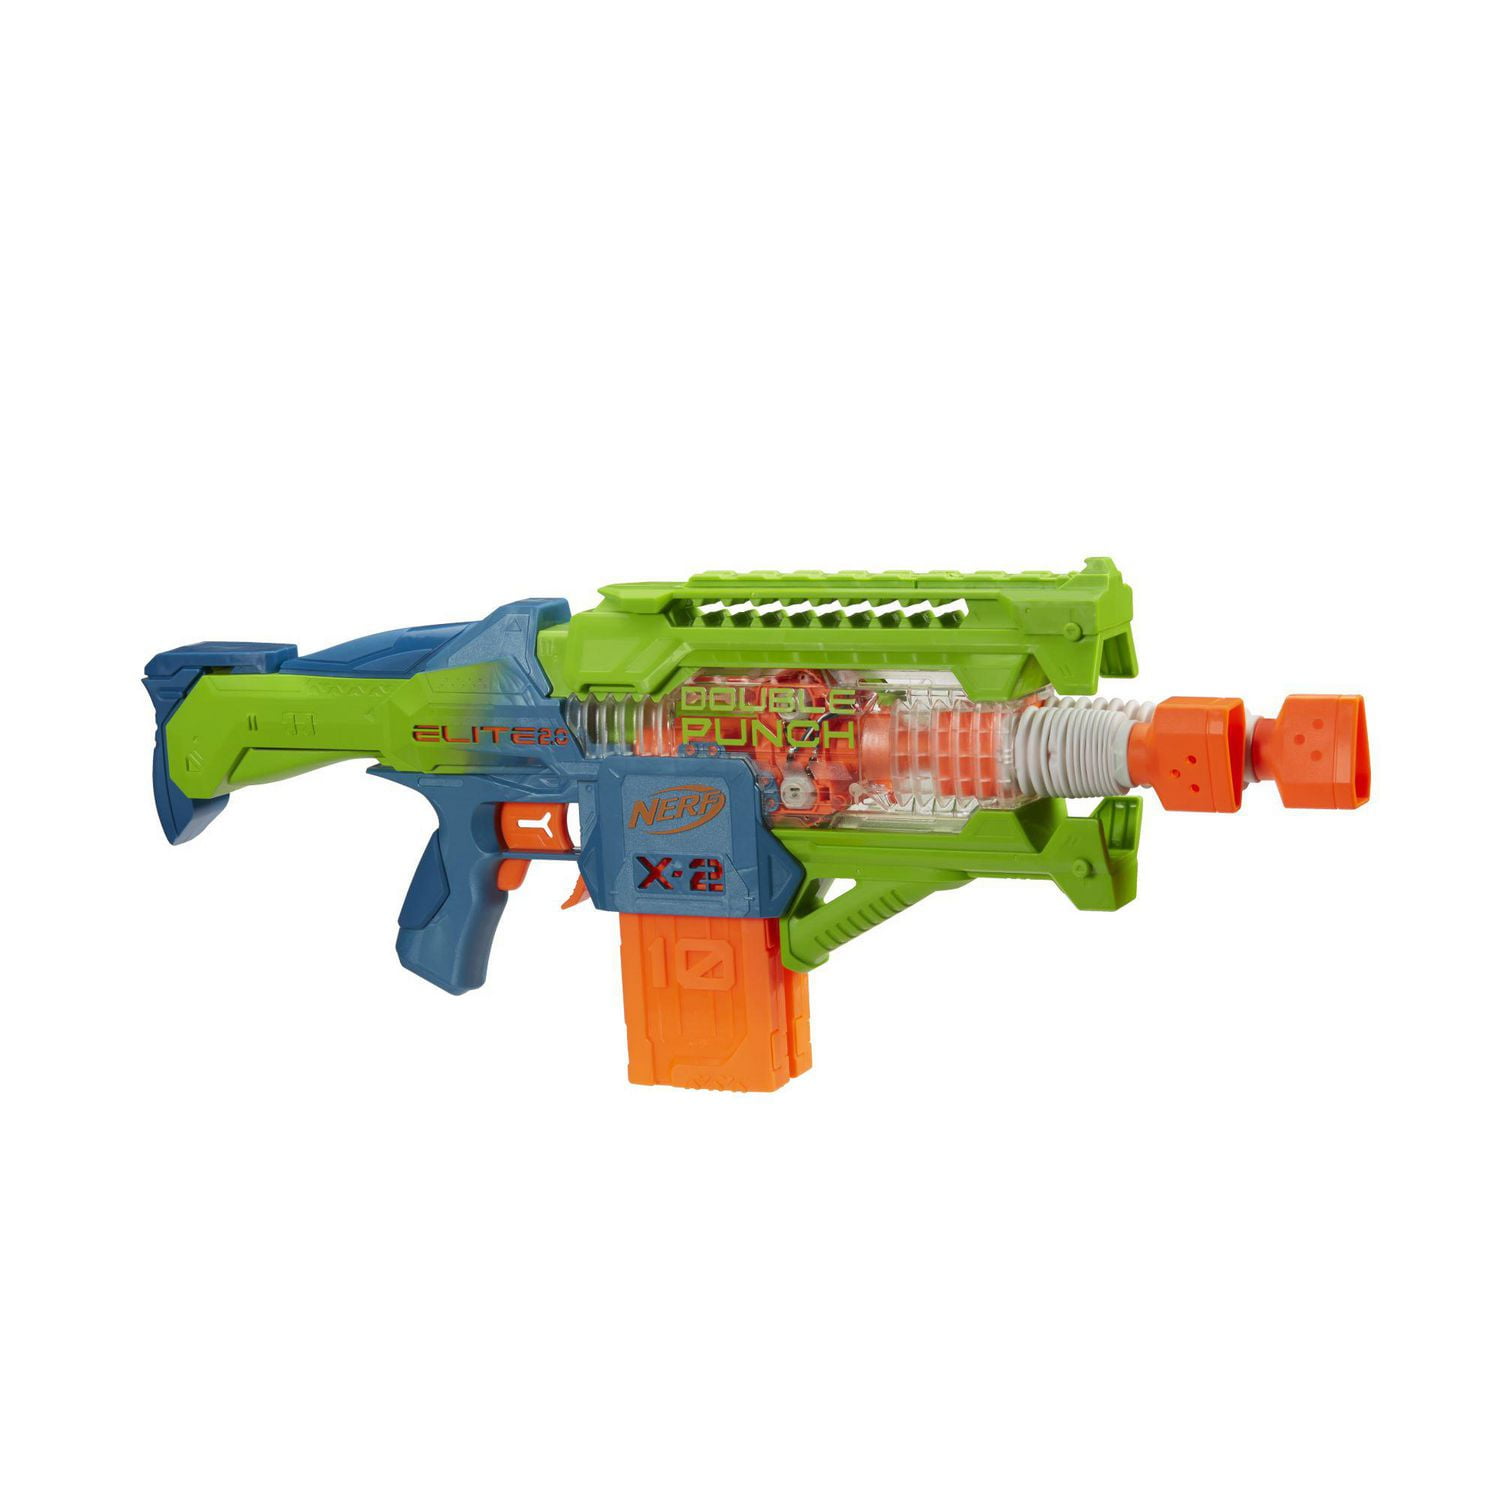 Nerf Elite 2.0 Double Punch Motorized Dart Blaster, Ages 8 and up